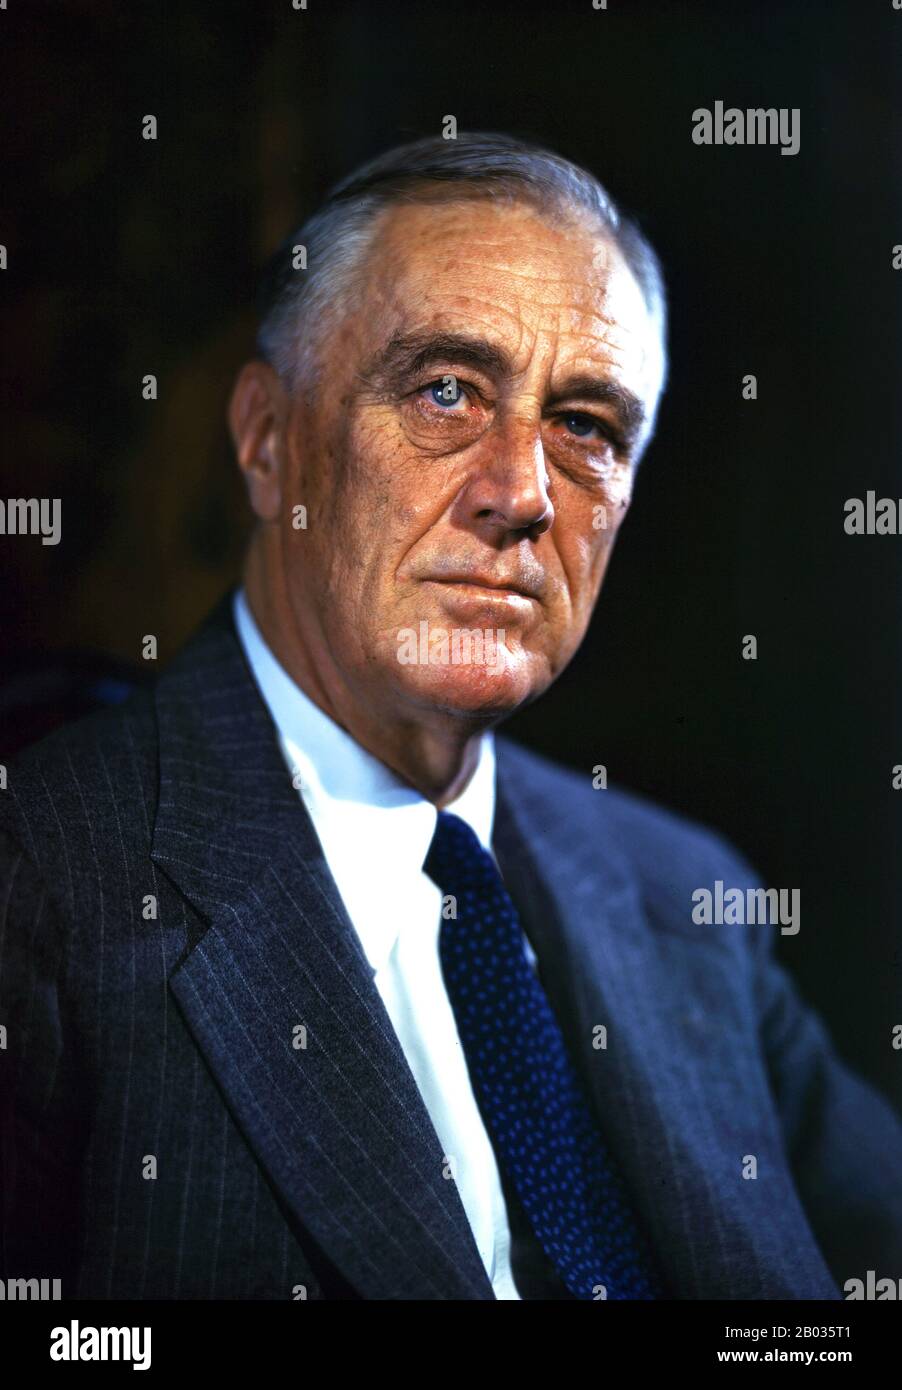 Franklin Delano Roosevelt served as the 32nd President of the United States, from 1933 to 1945. A Democrat, he won a record four presidential elections and dominated his party after 1932 as a central figure in world events during the mid-20th century, leading the United States during a time of worldwide economic depression and total war.  His program for relief, recovery and reform, known as the New Deal, involved a great expansion of the role of the federal government in the economy. As a dominant leader of the Democratic Party, he built the New Deal Coalition that brought together and united Stock Photo